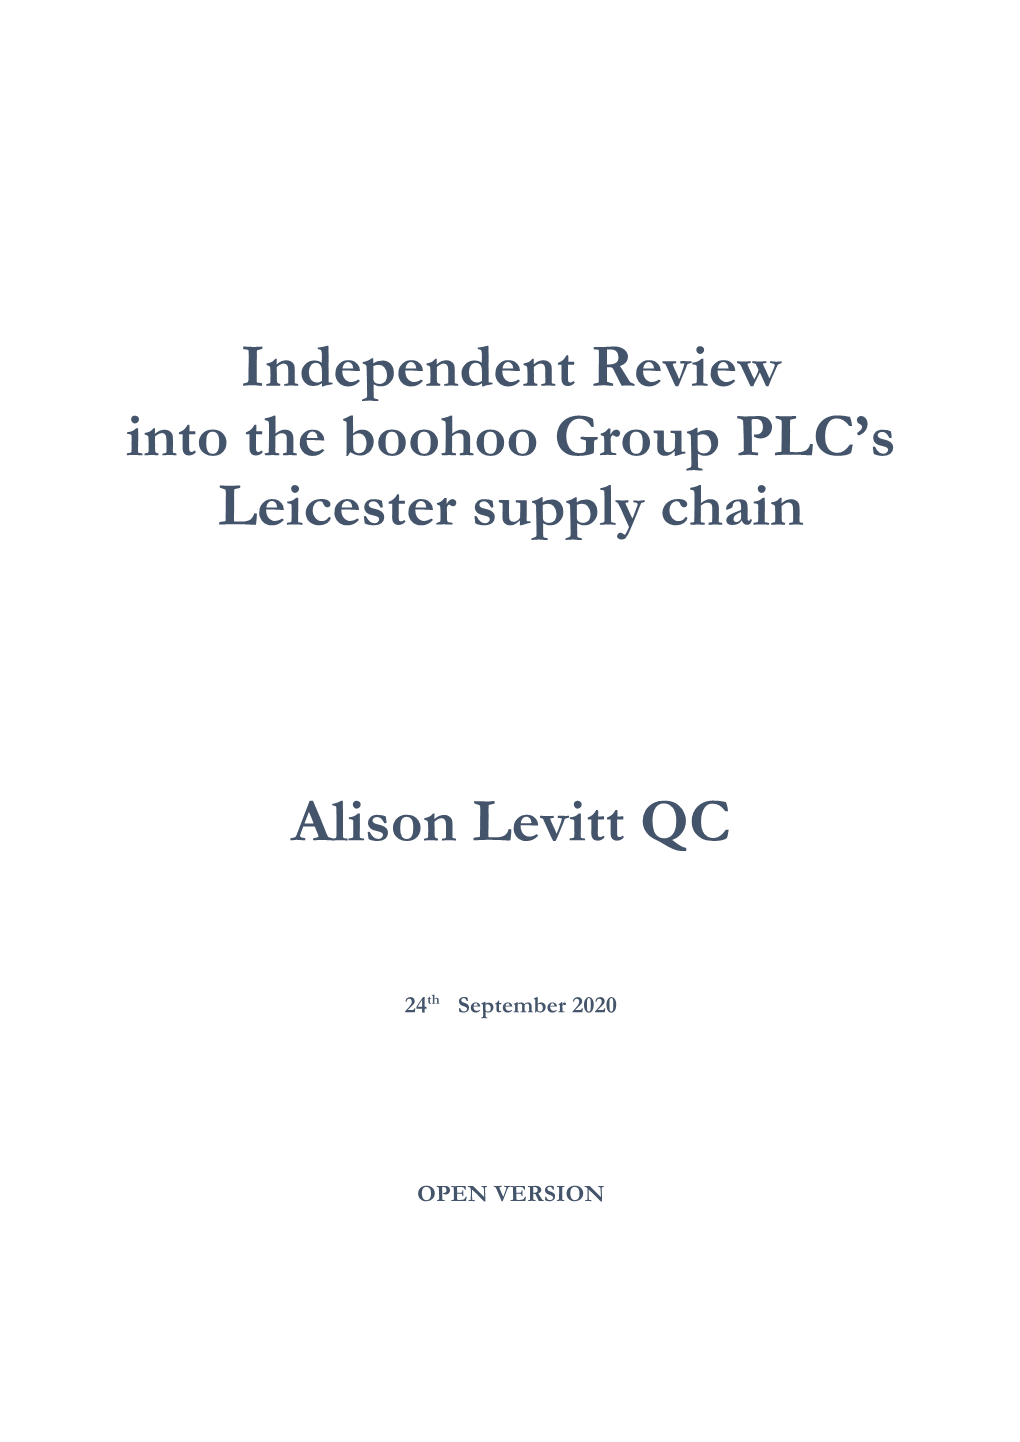 Independent Review Into the Boohoo Group PLC's Leicester Supply Chain